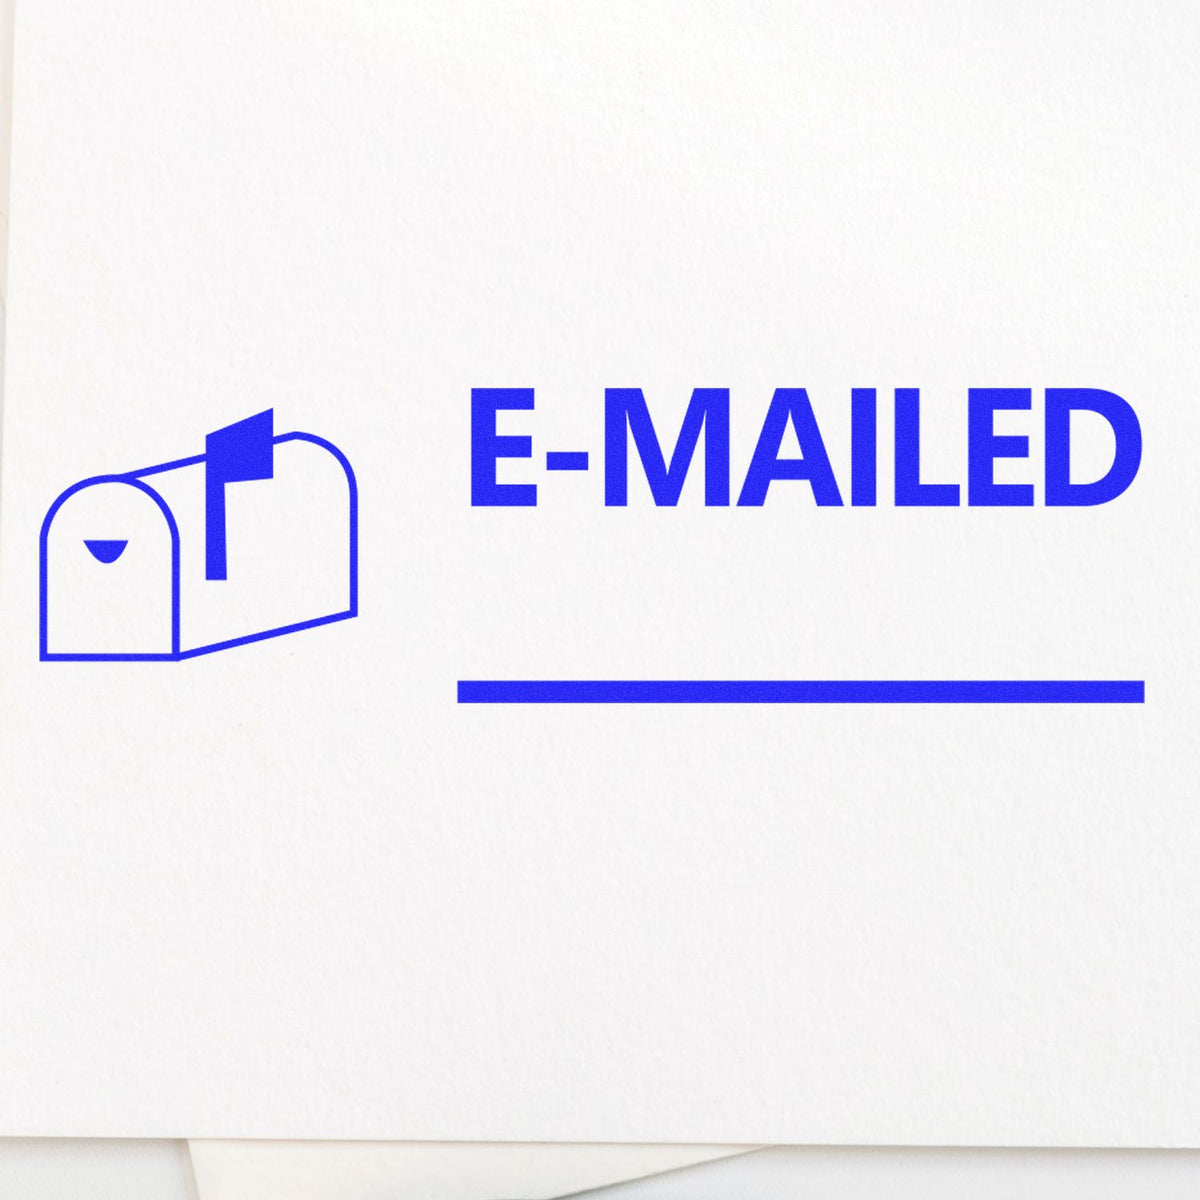 Large Pre-Inked Emailed with Mailbox Stamp In Use Photo